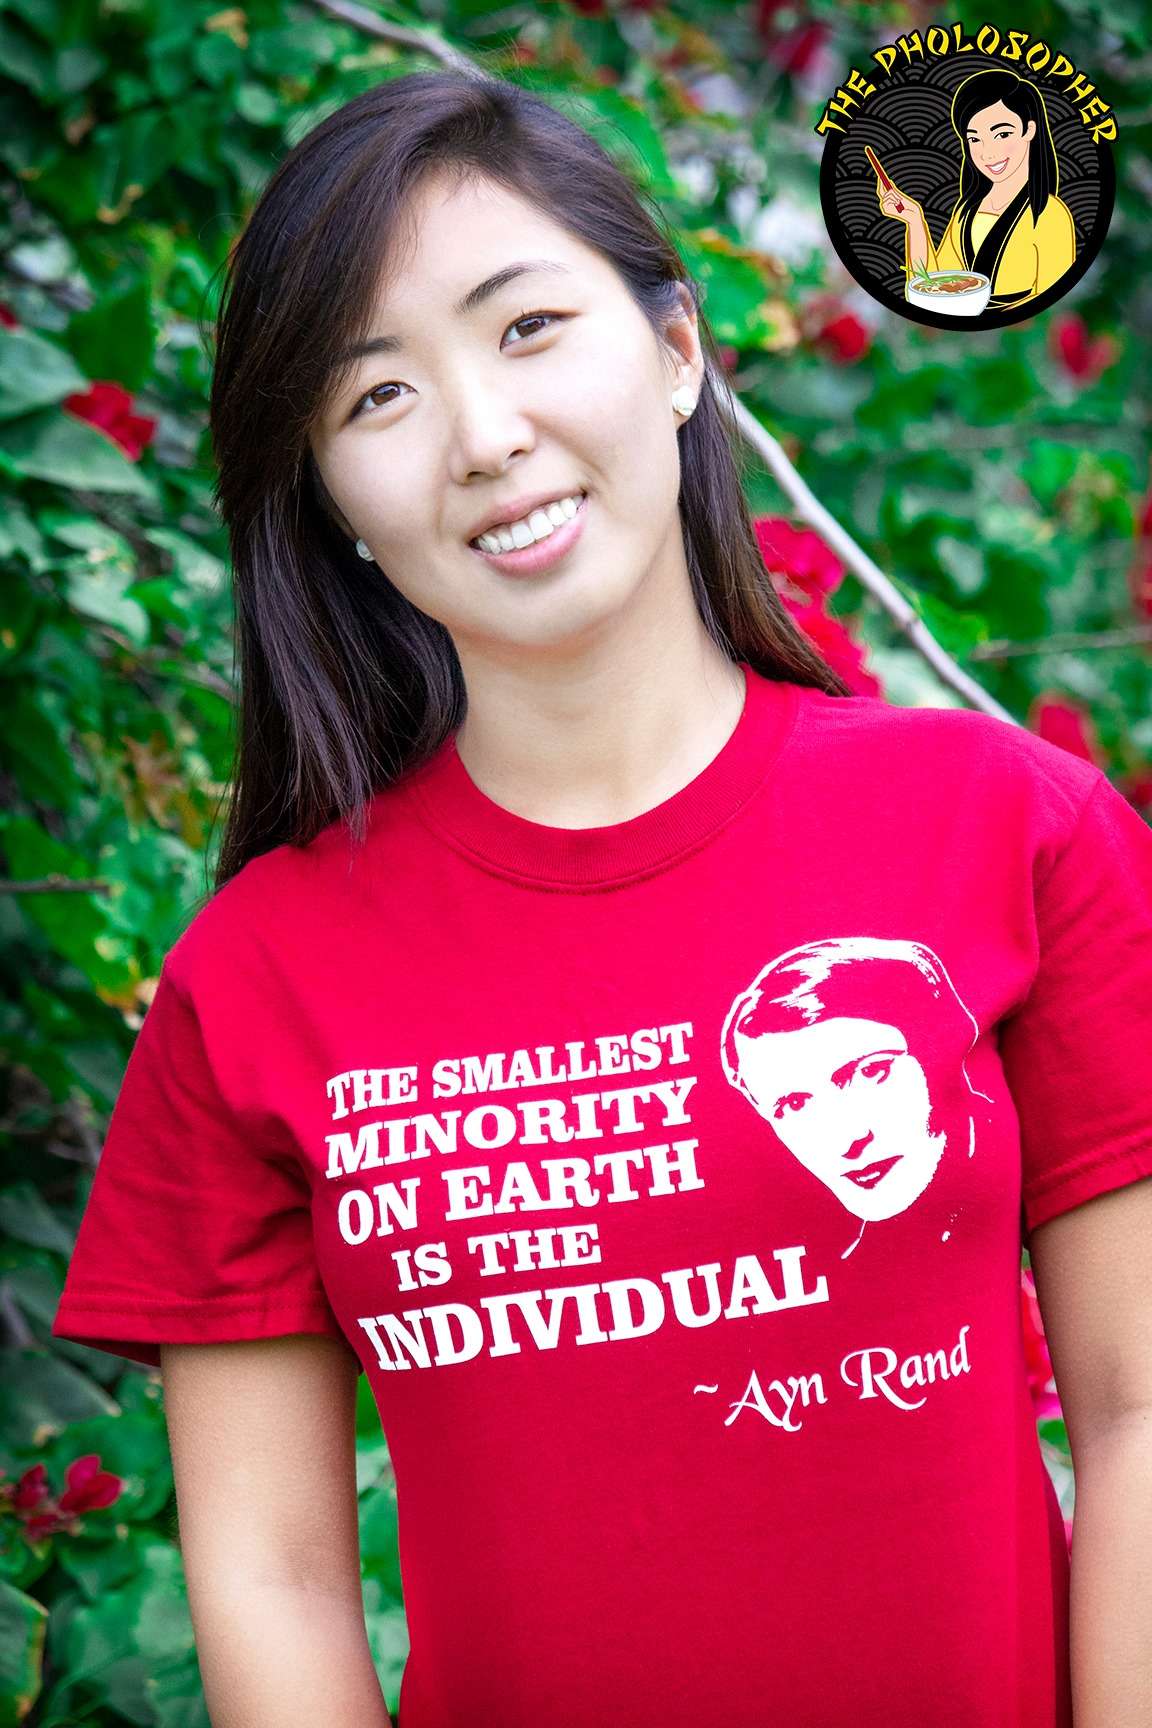 The smallest minority on earth is the individual - Ayn Rand